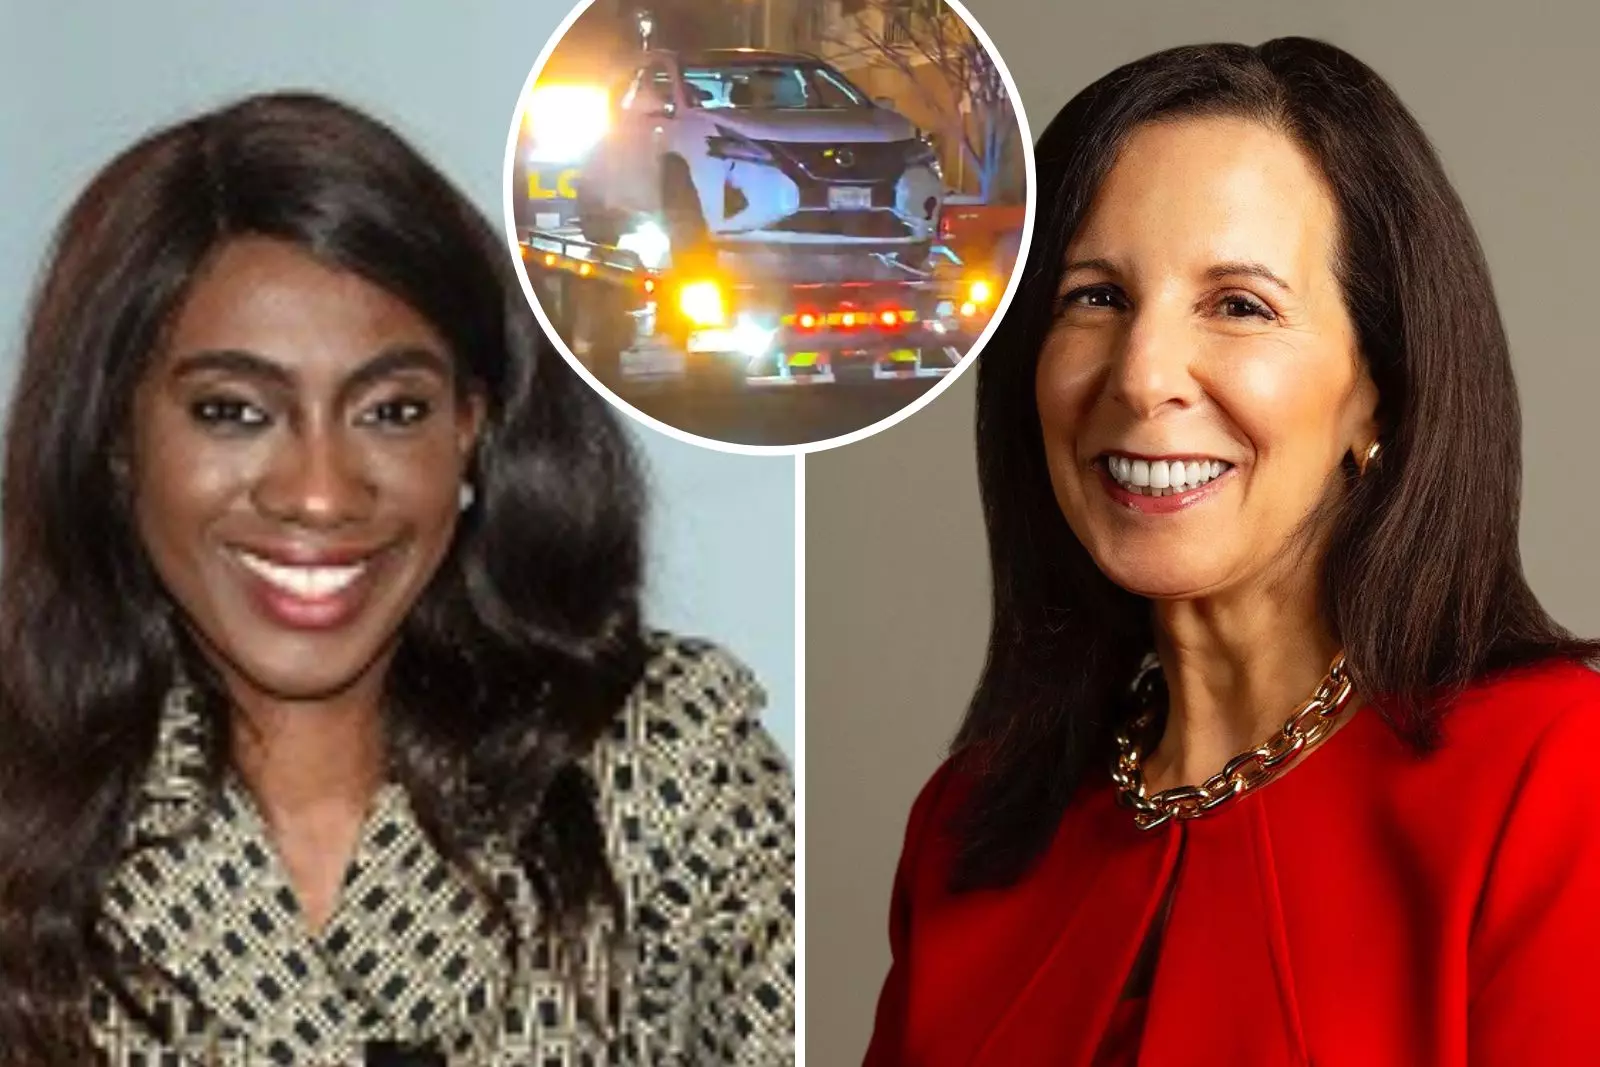 New evidence found in NJ councilwoman's shooting